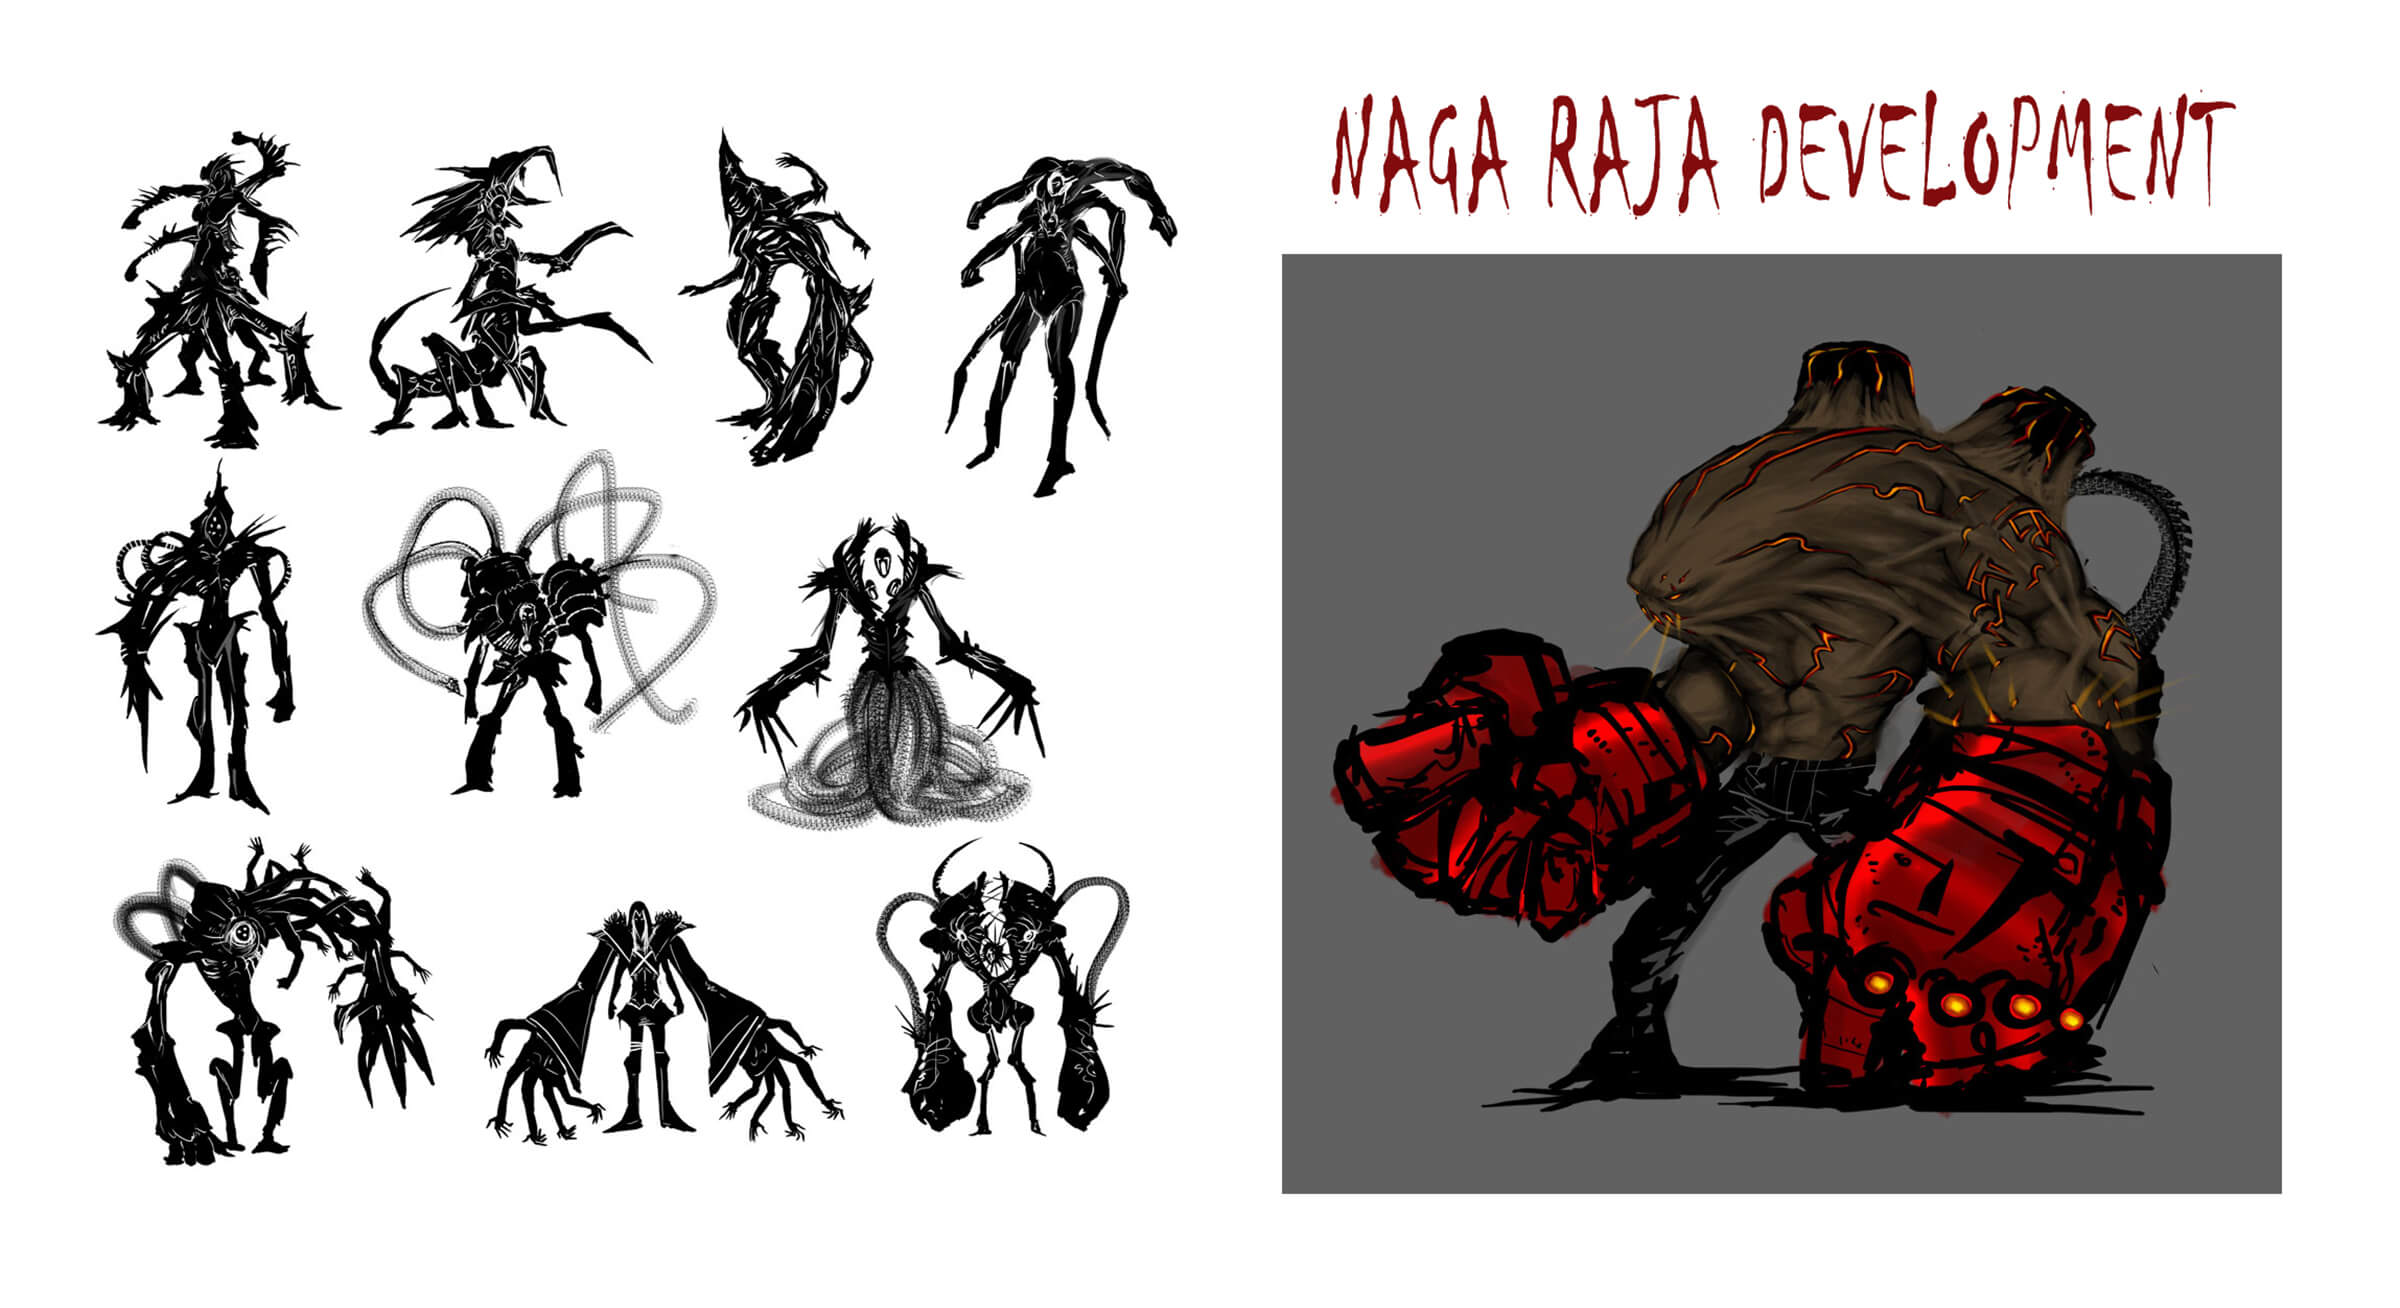 Black-and-white development sketches of an angular multi-armed/legged beast, some with cybernetic augmentations.